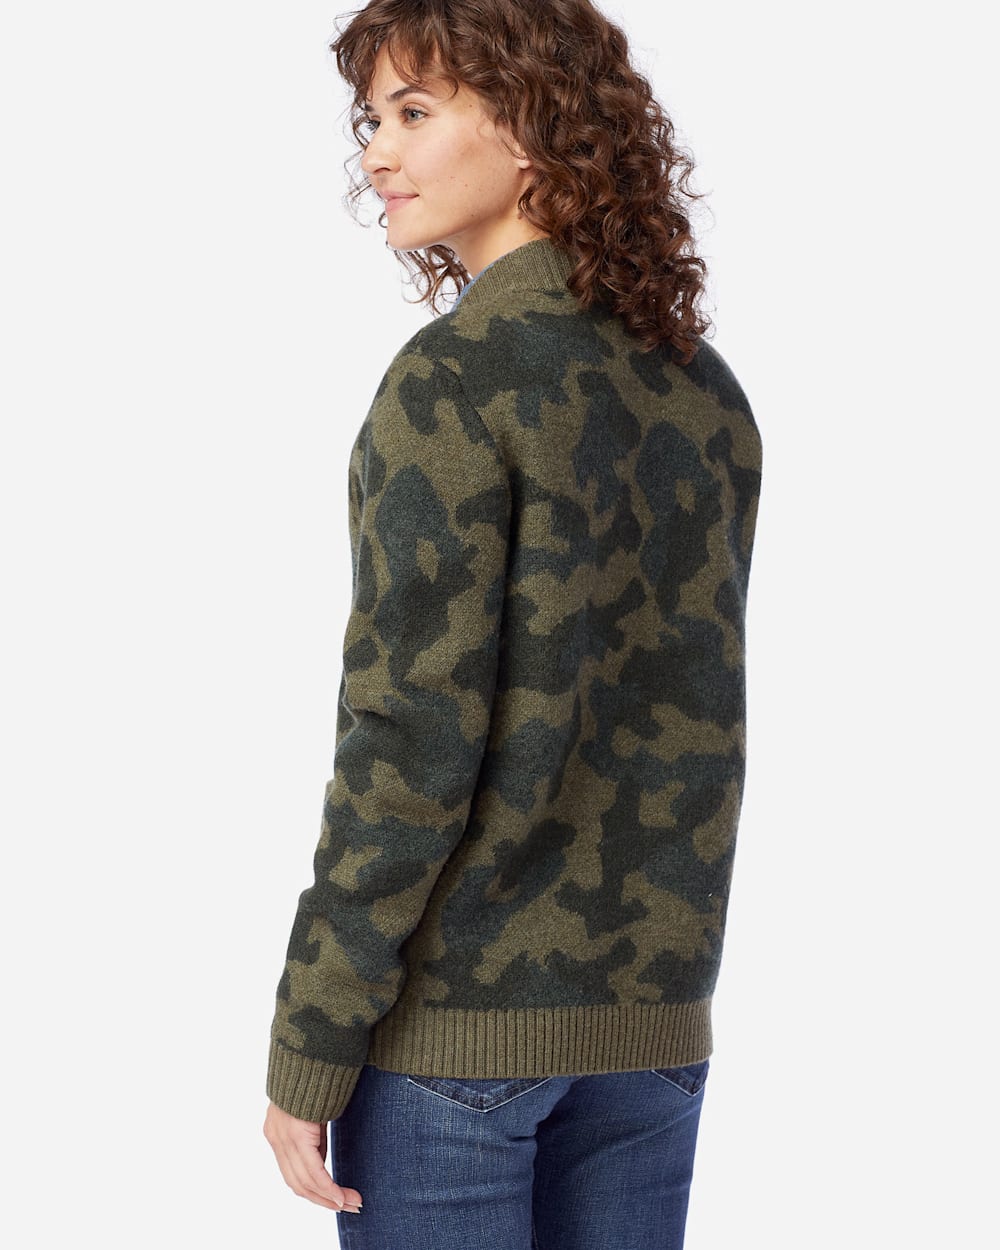 ALTERNATE VIEW OF WOMEN'S BOILED WOOL BOMBER JACKET IN OLIVE CAMO image number 3